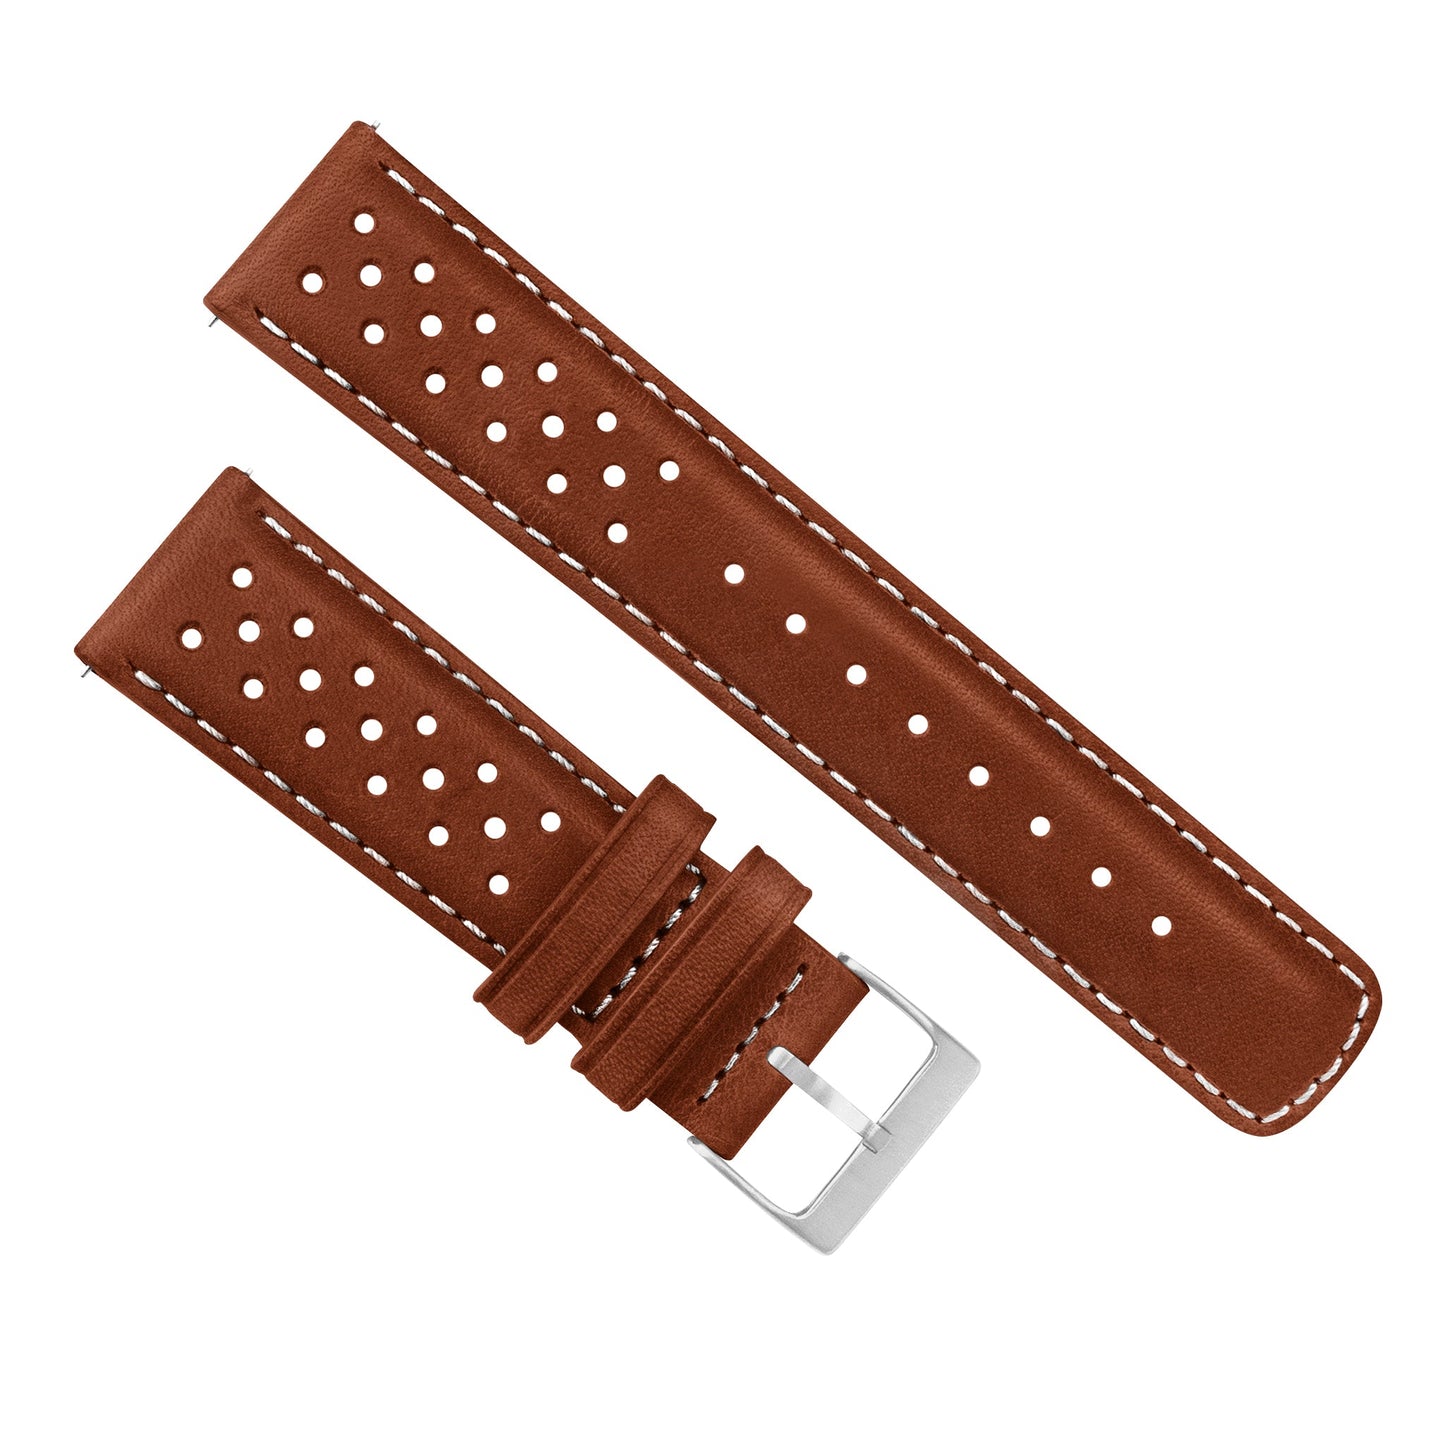 Samsung Galaxy Watch5 Racing Horween Leather Chocolate Brown Linen Stitch Watch Band